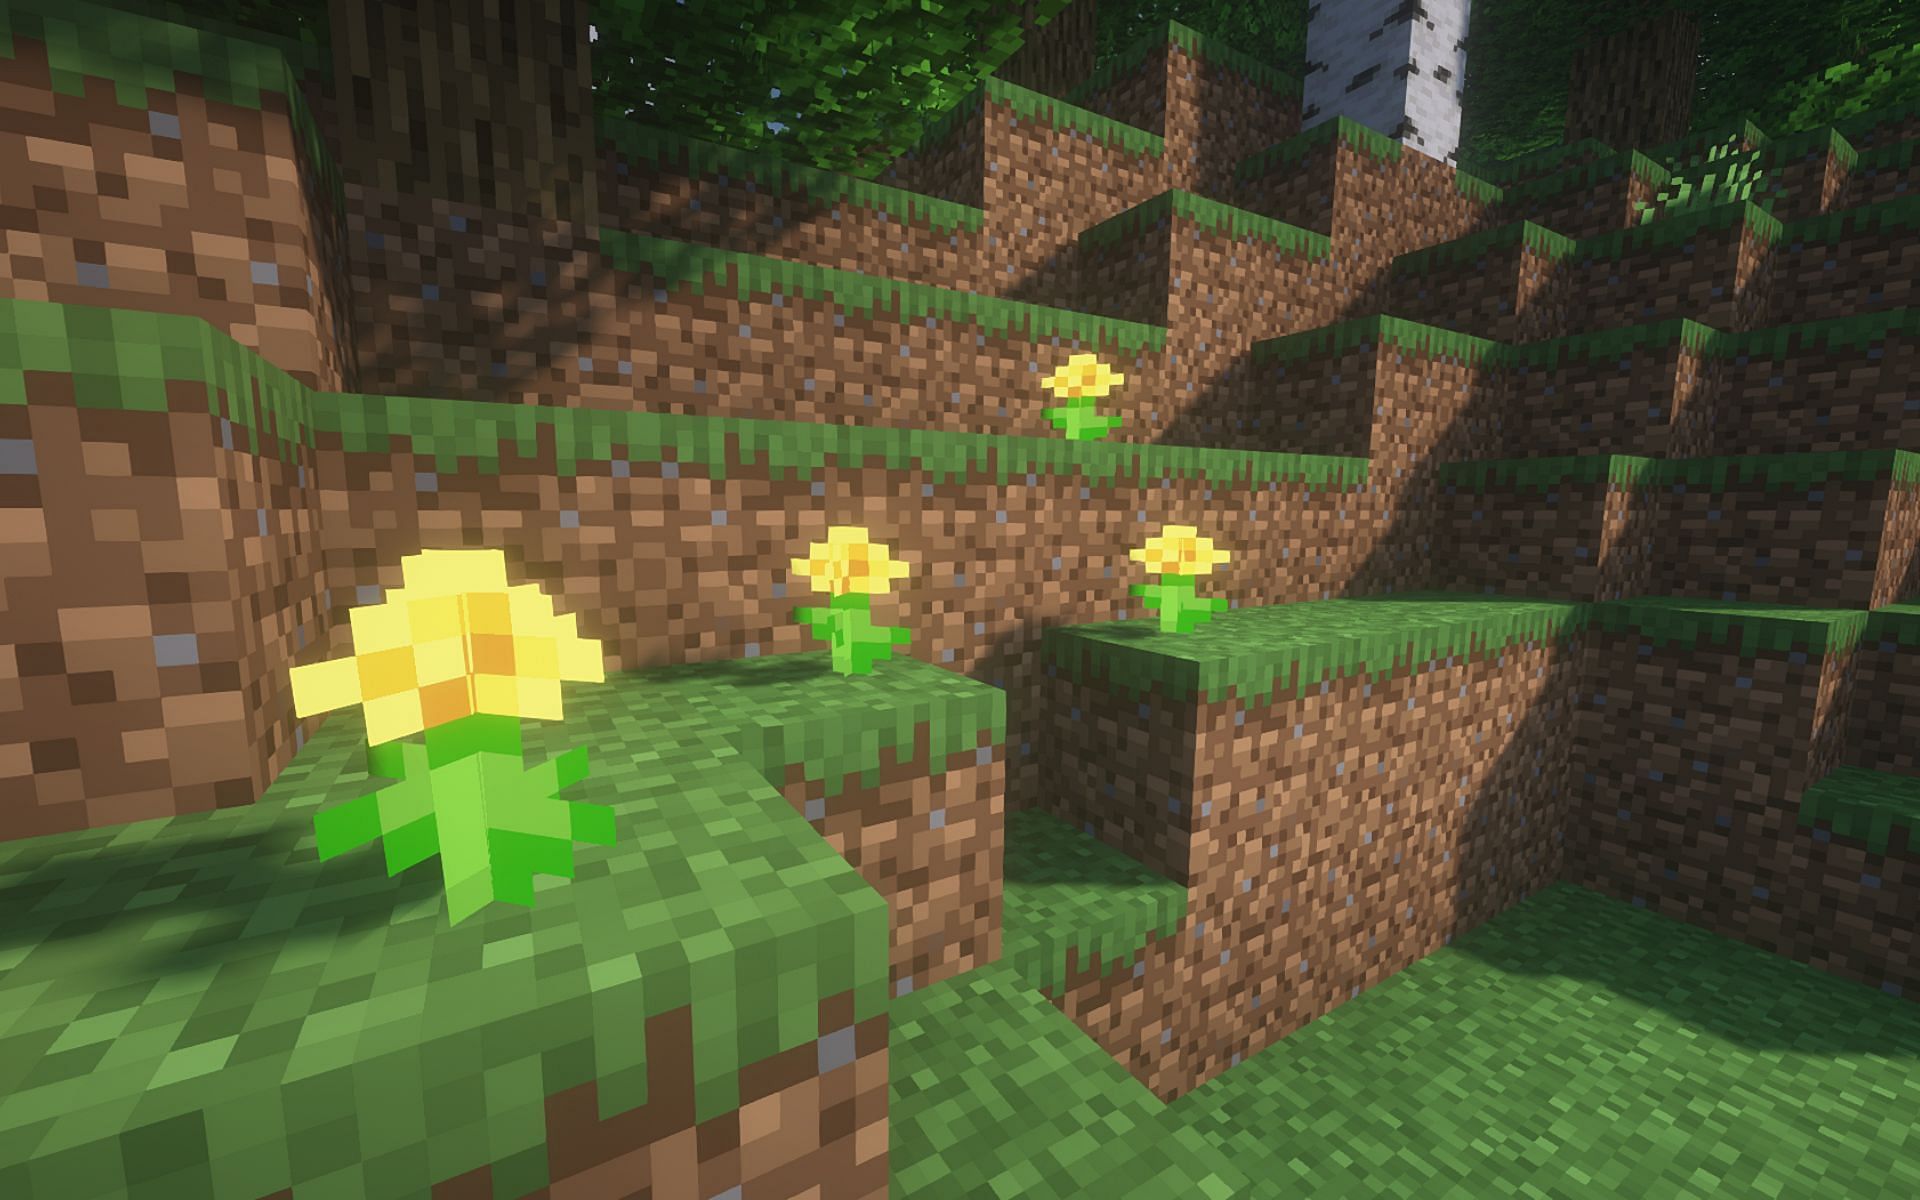 BSL shaders are beautiful mod to make the game prettier (Image via Minecraft)